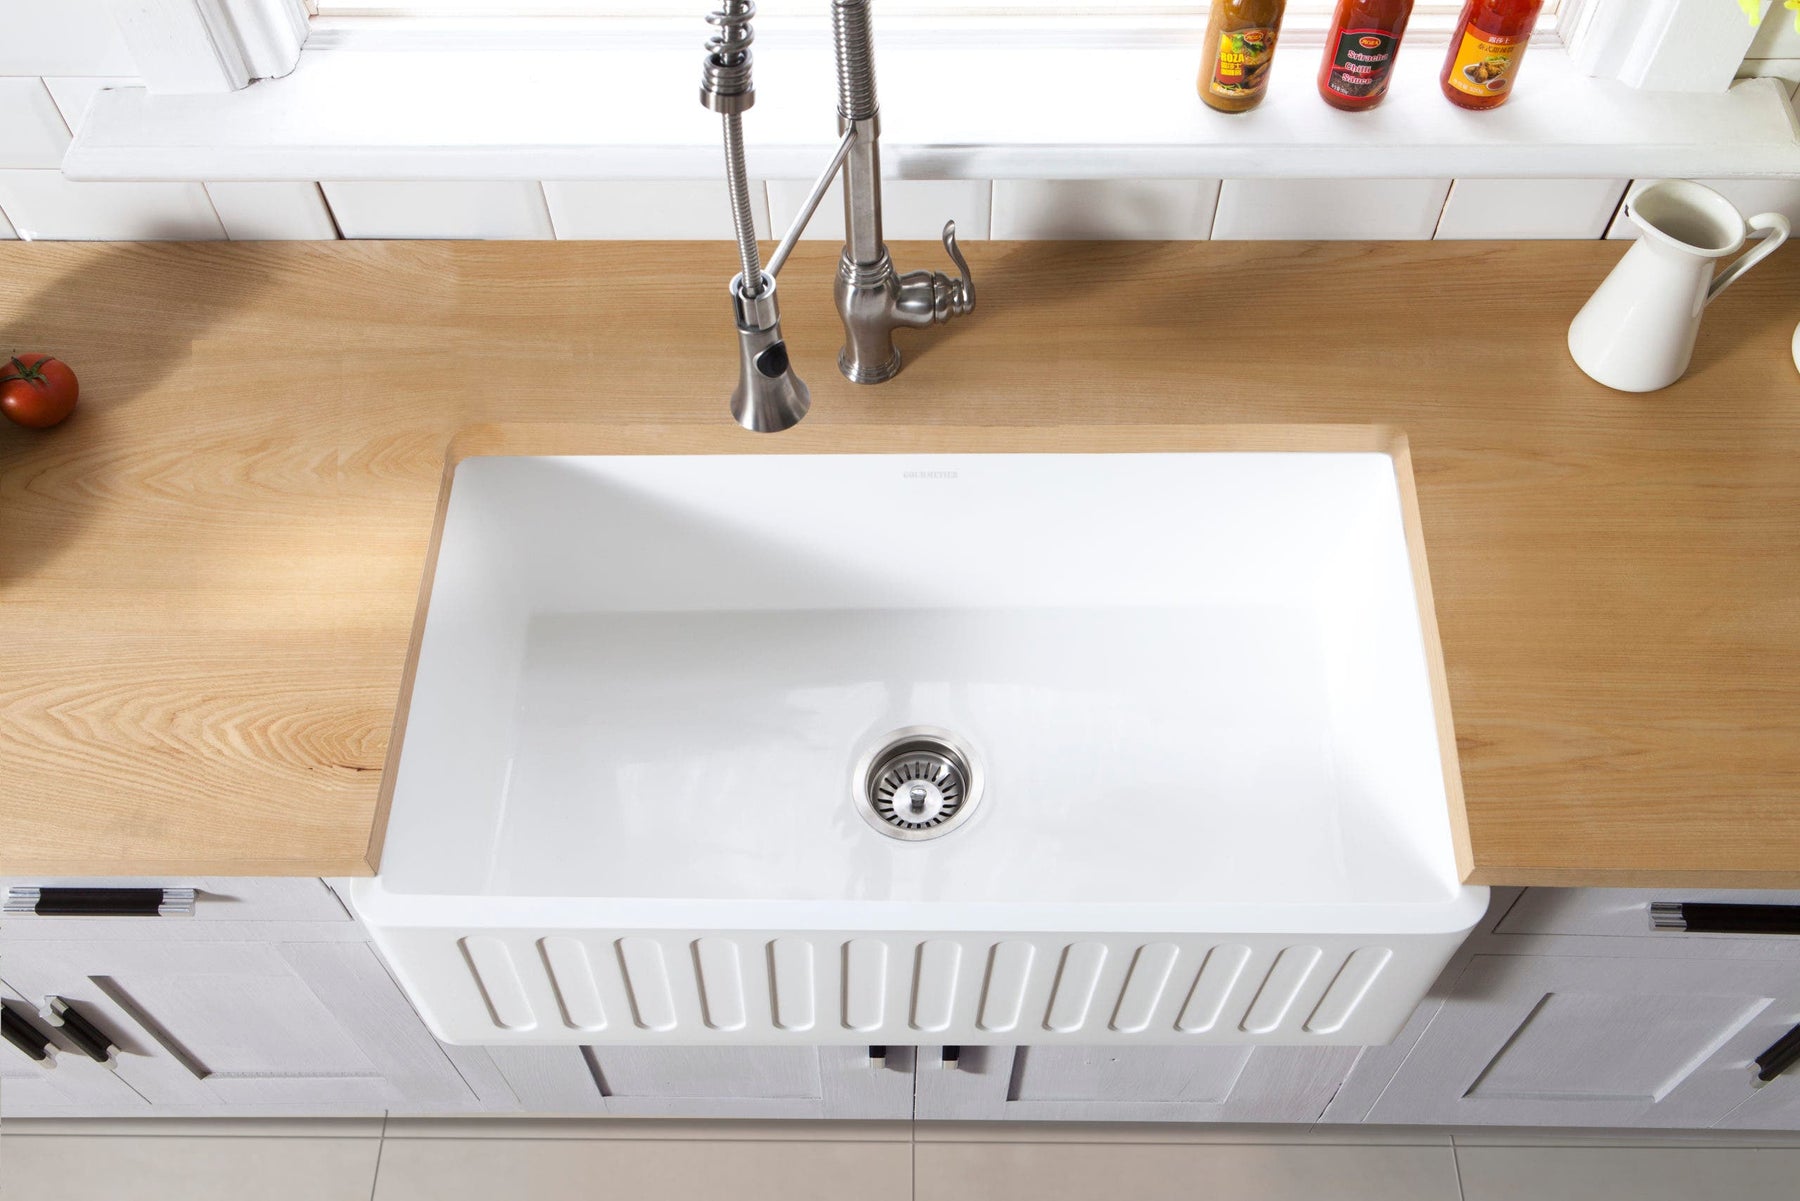 How to Choose a Kitchen Sink That's Right For You